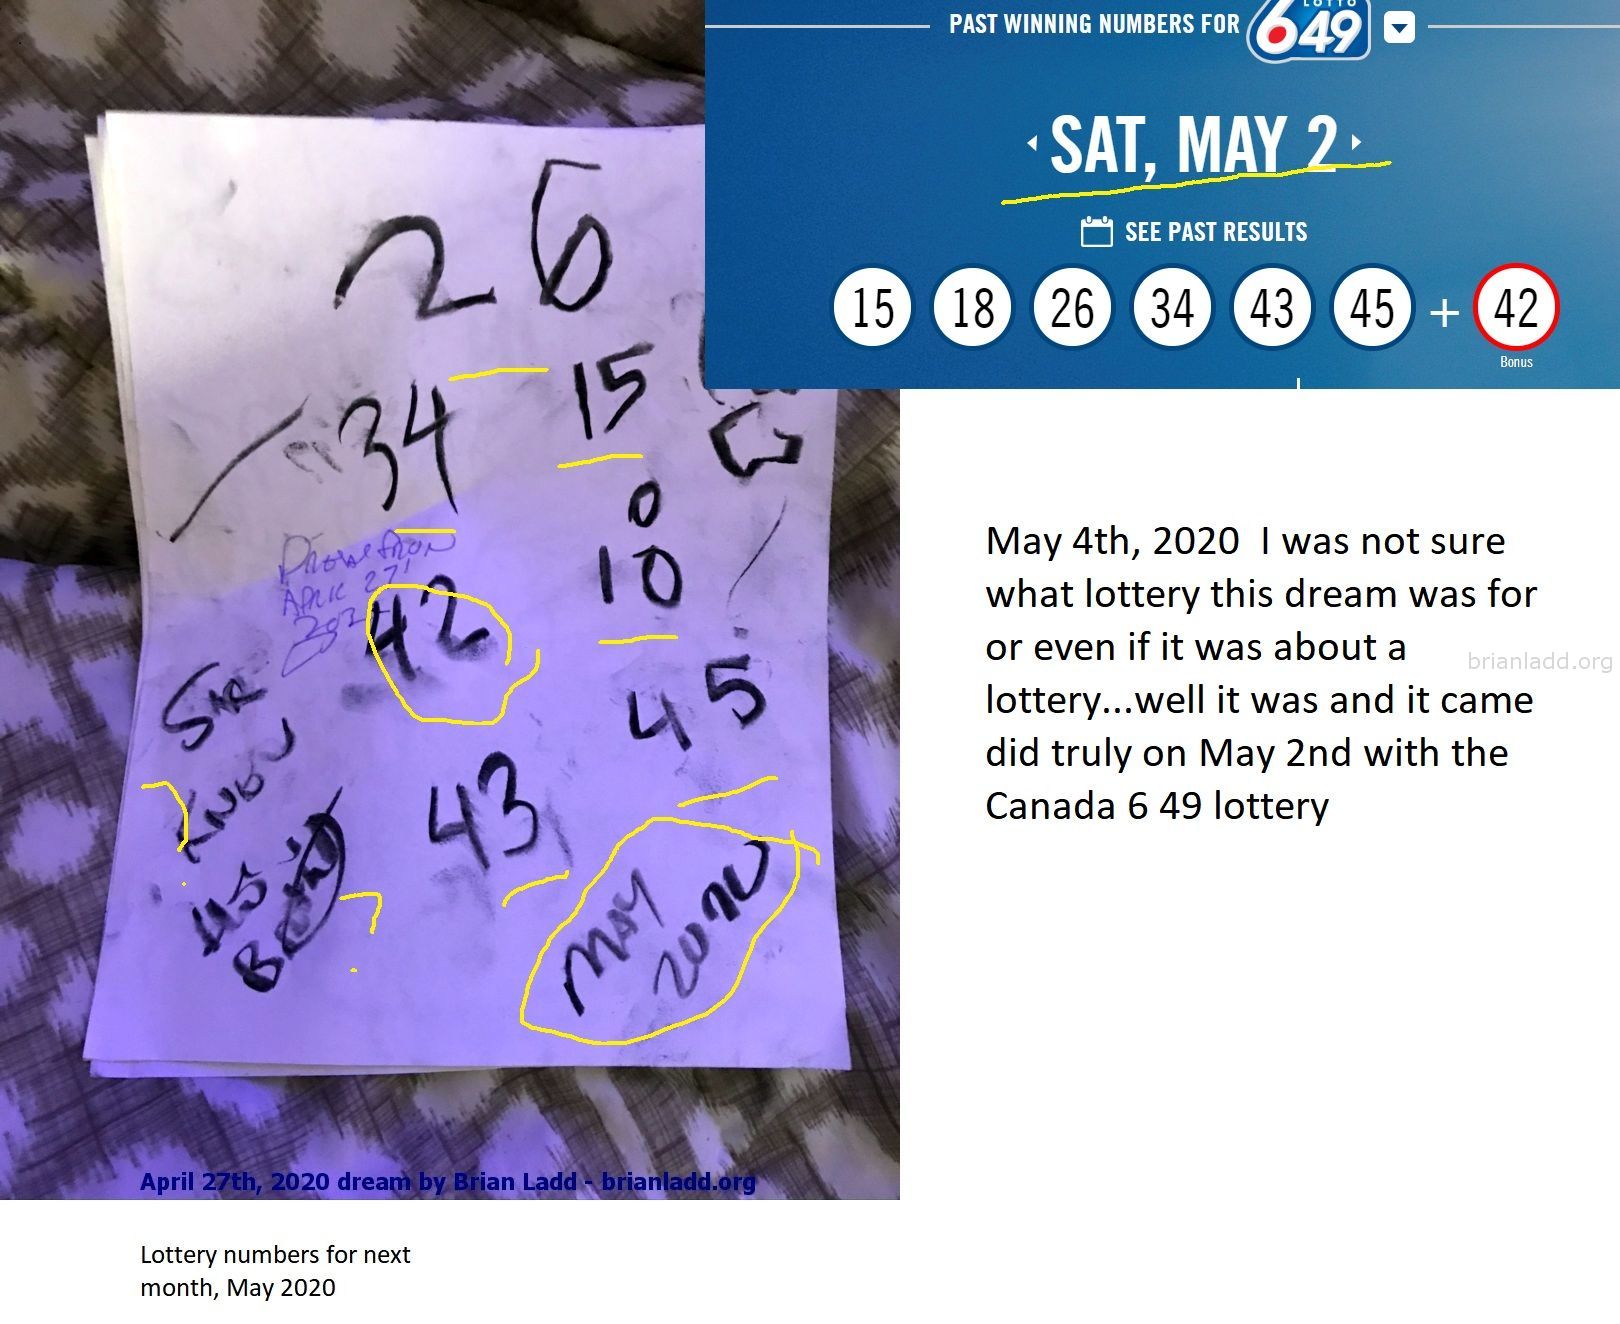 May 4Th 2020 I Was Not Sure What Lottery This Dream Was For Or Even If It Was About A Lottery Well It Was And It Came Di...
May 4th, 2020 I Was Not Sure What Lottery This Dream Was For Or Even If It Was About A Lottery...Well It Was And It Came Did Truly On May 2nd With The Canada 6 49 Lottery Dream Number 13003 27 April 2020 3 Psychic Prediction 26 34 15 42 18 43 45 May 2020...All I Know Is These Numbers Are For Next Month, No Idea What Lottery Or Even If These Are Lottery Numbers. From  https://briansprediction.com/Thumbnails.Php?Album=2454  ( NEW!  Free lottery picks by mail, I will personally fill out your blank lottery sheet and mail it back to you for free, postage is included!  visit  https://briansprediction.com/picksbymail   )
